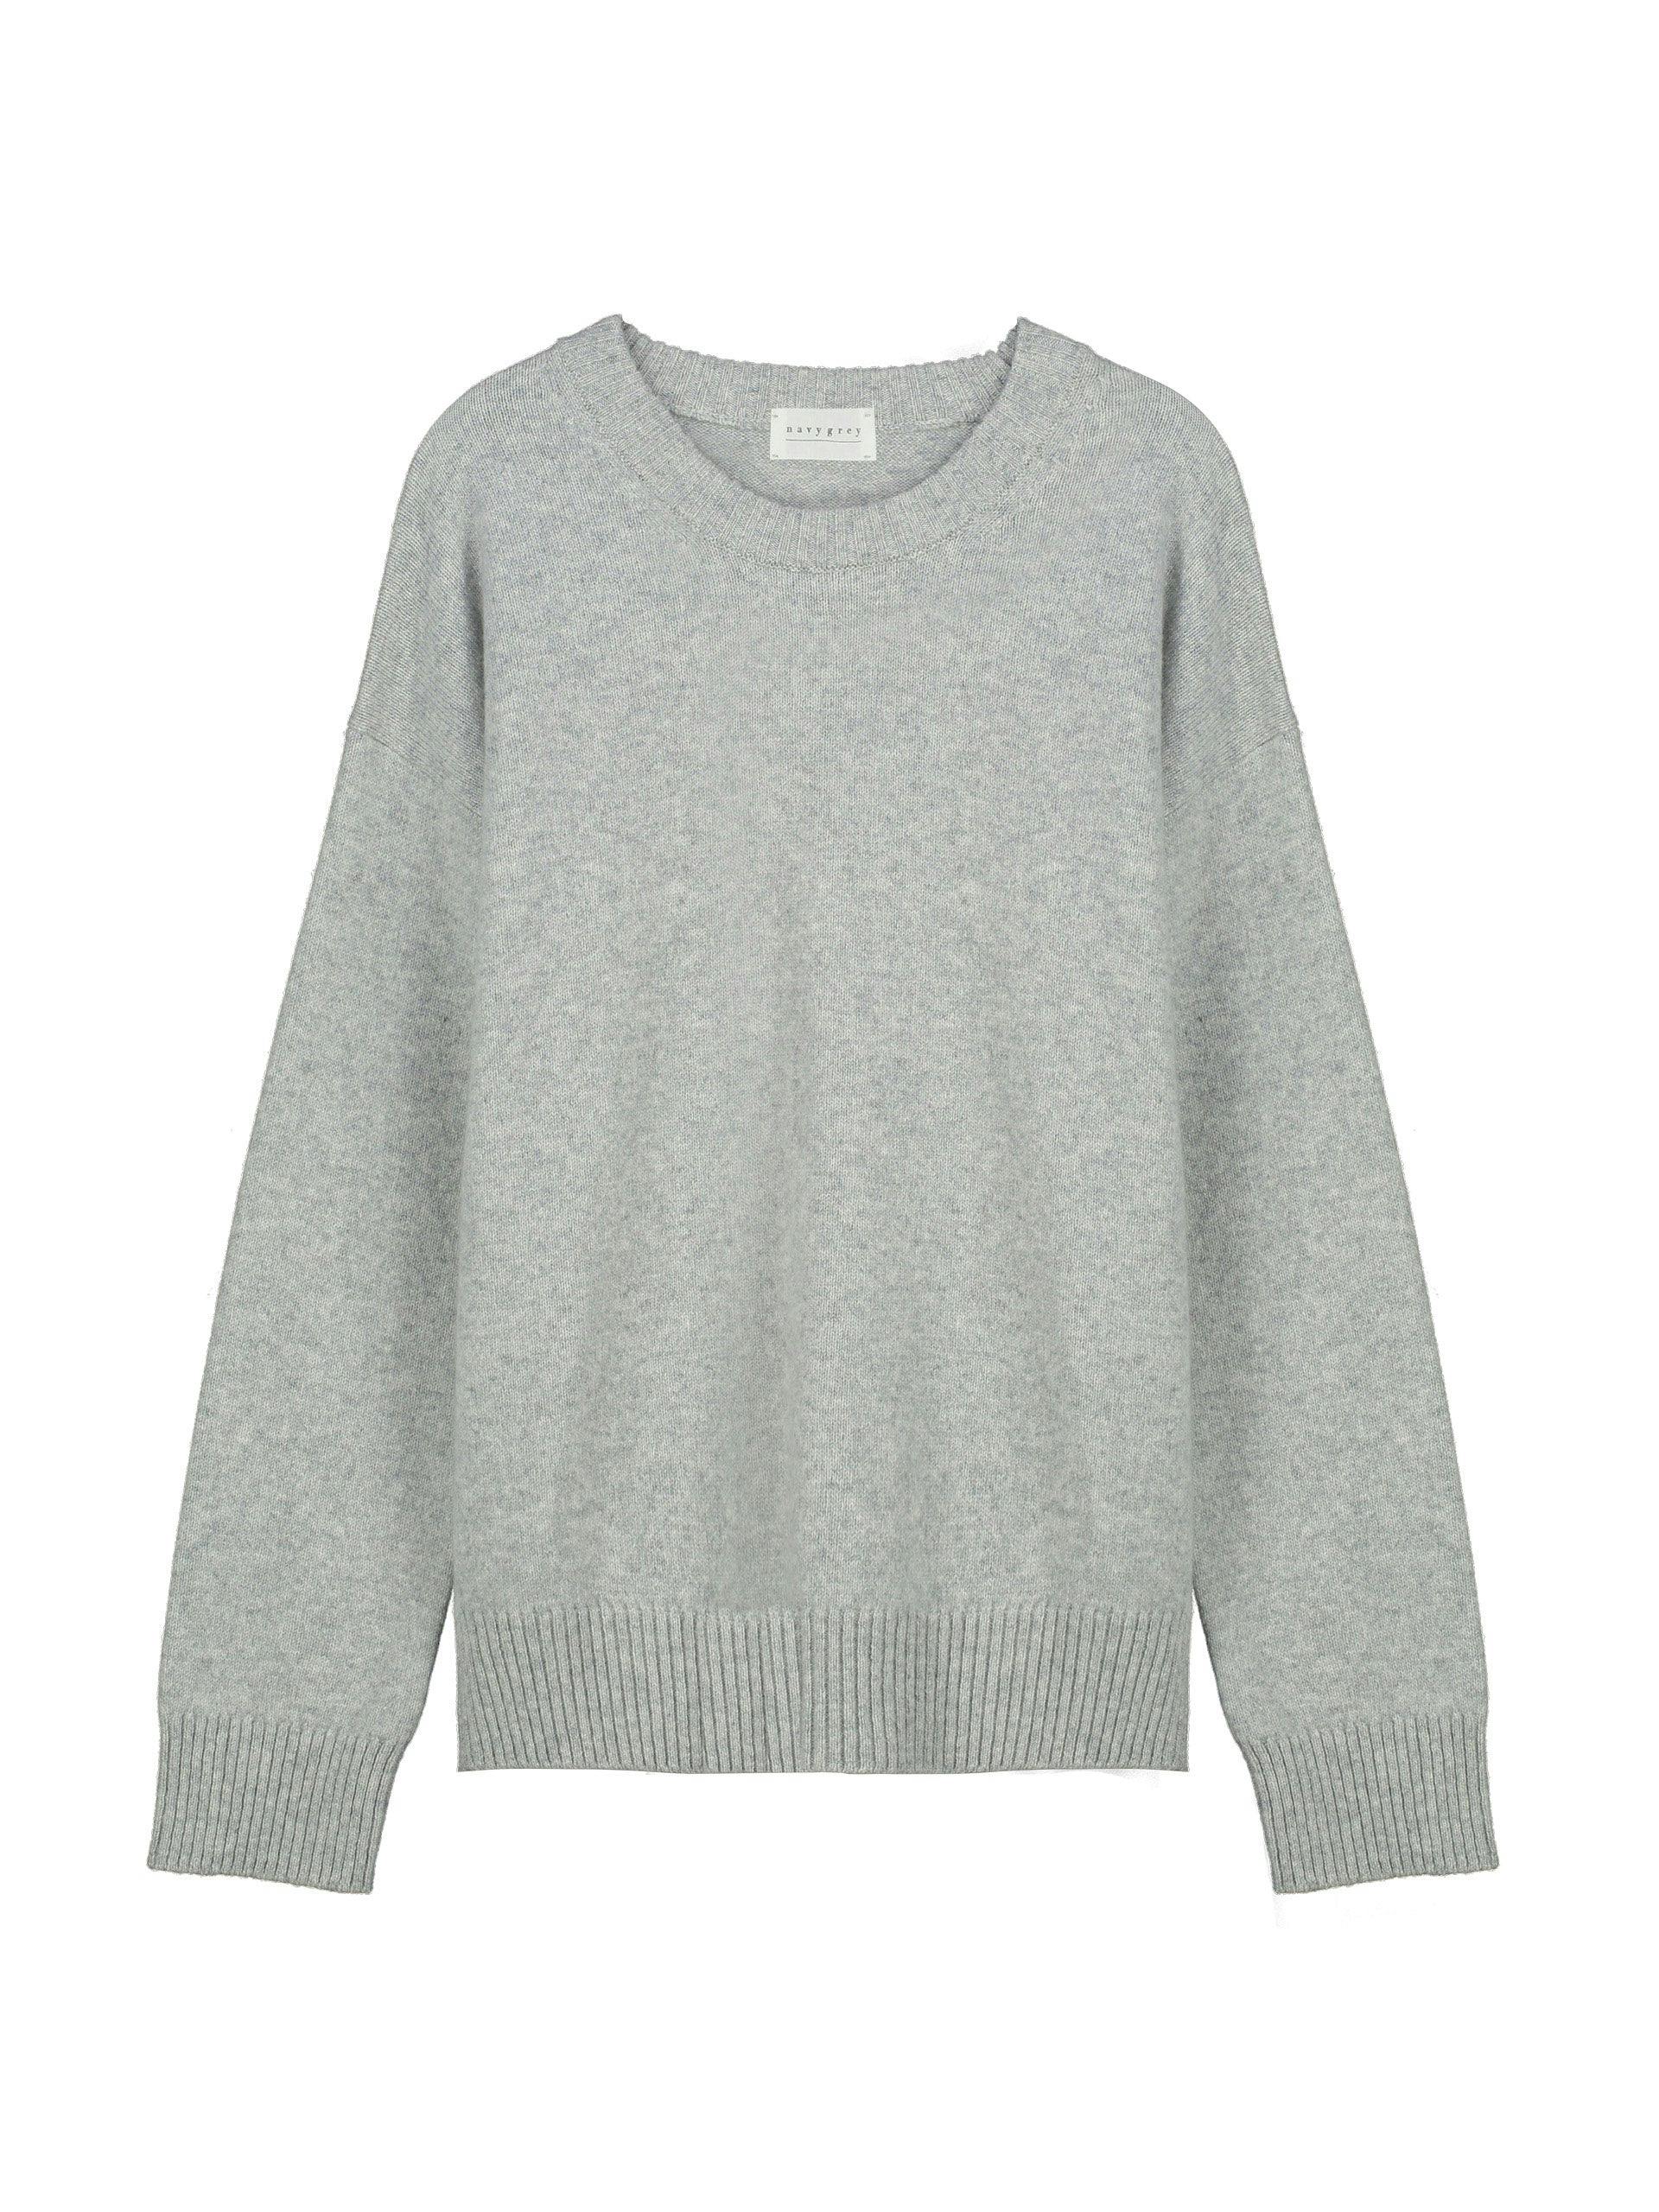 The Relaxed knit in grey marl